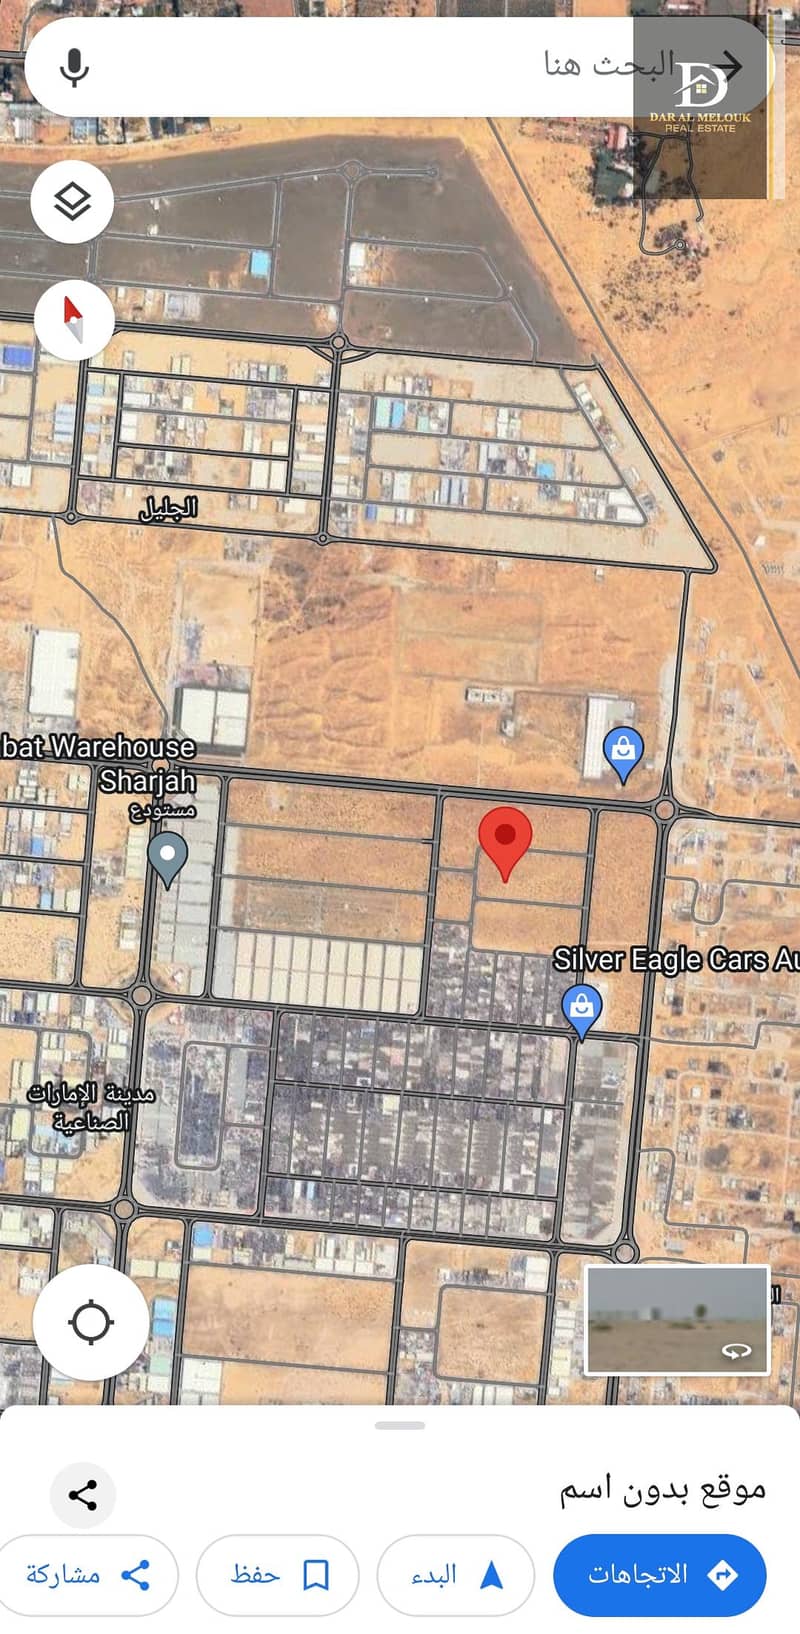 For sale in Sharjah, Al Sajaa Industrial Area, industrial land, area of ​​20,000 thousand feet, industrial permit, Hota and Shubrat, excellent location, close to construction, close to Emirates Industrial City Street, and close to Emirates Transit Road, c